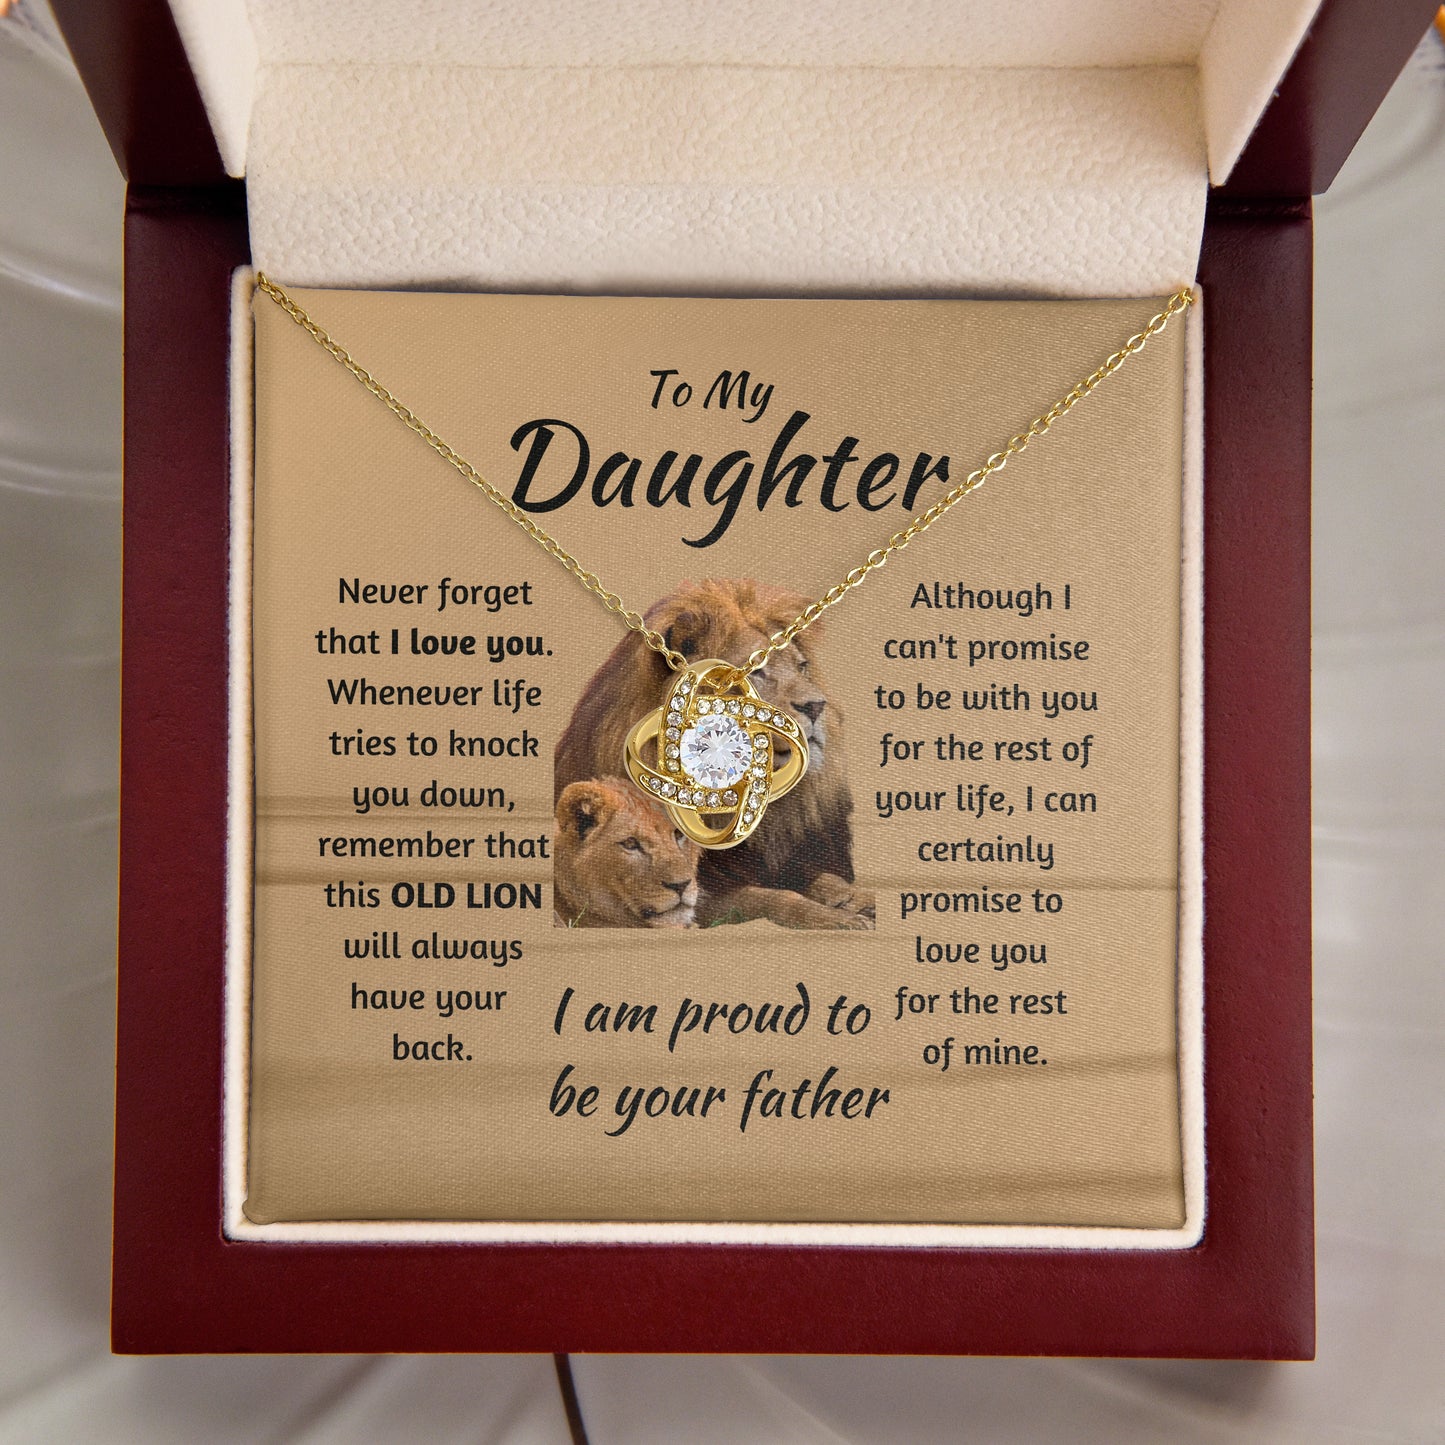 To My Daughter - Proud to be your father - Necklace